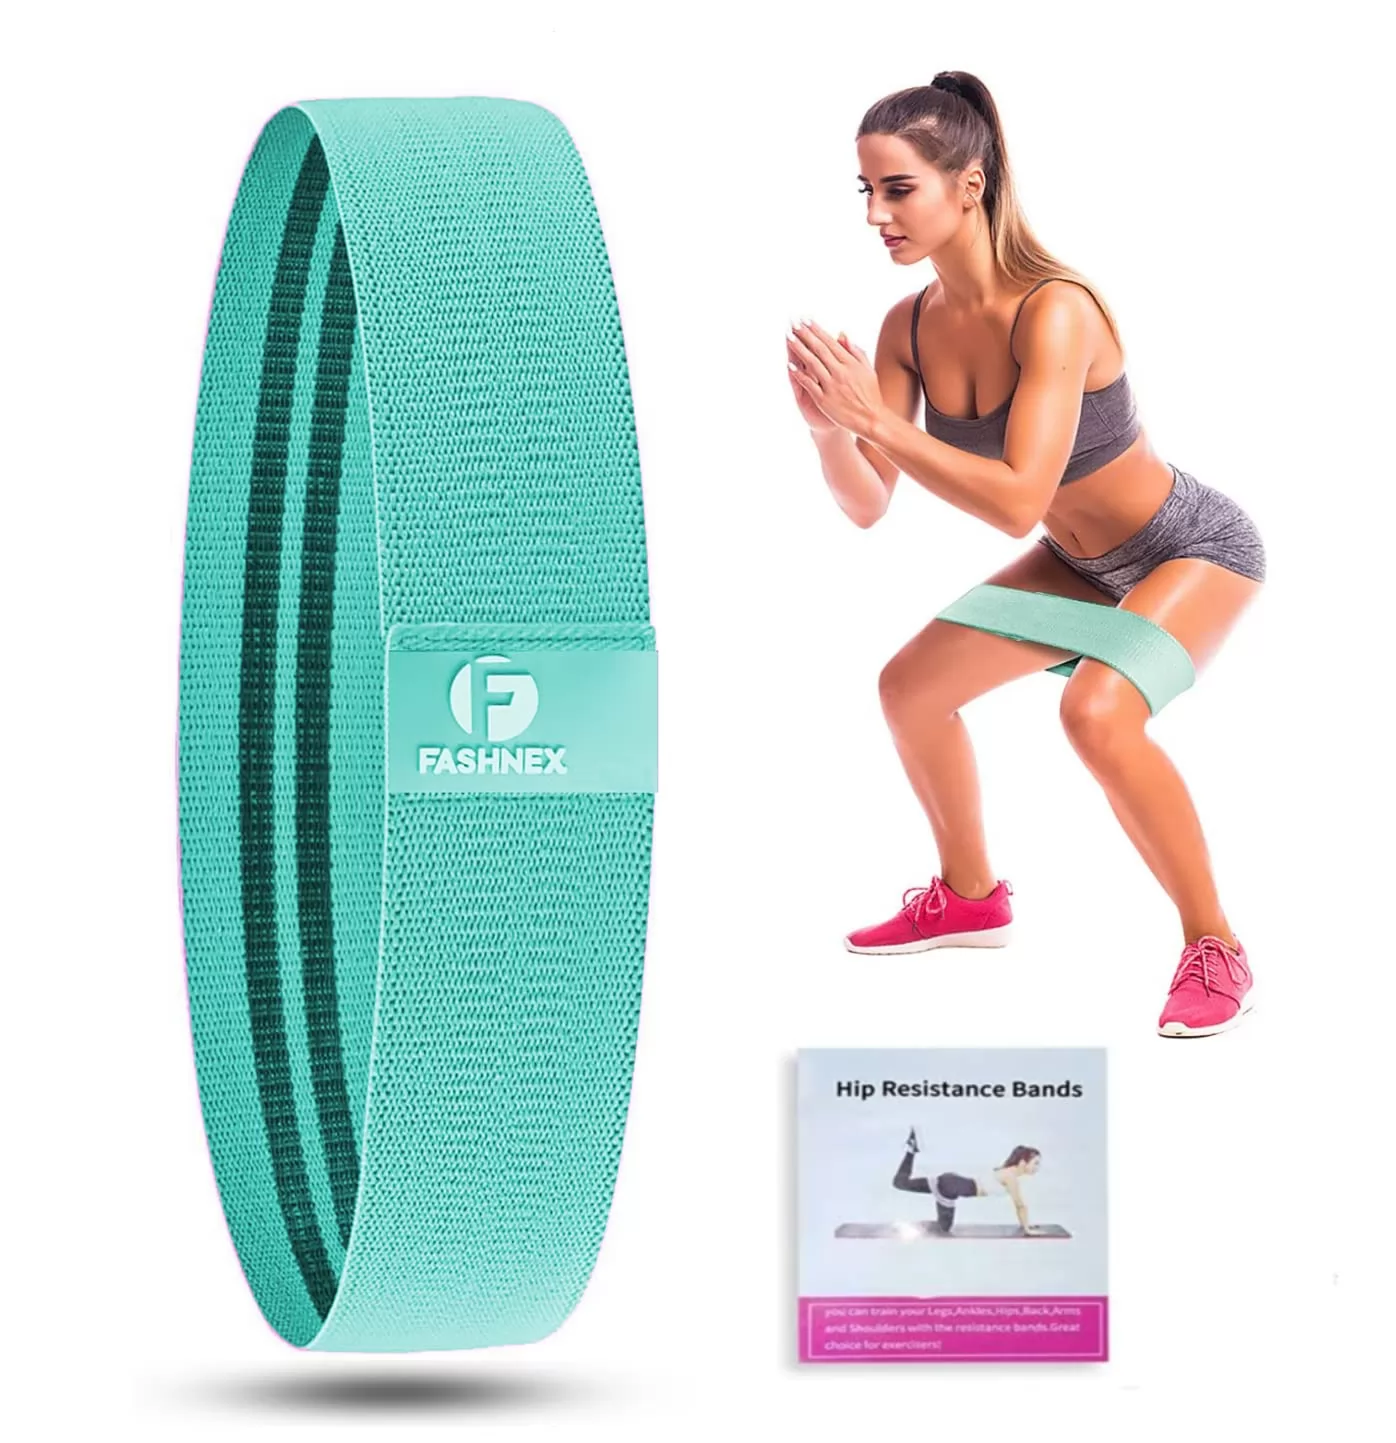 Fashnex Resistance Band with Exercise Bands Workout Guide